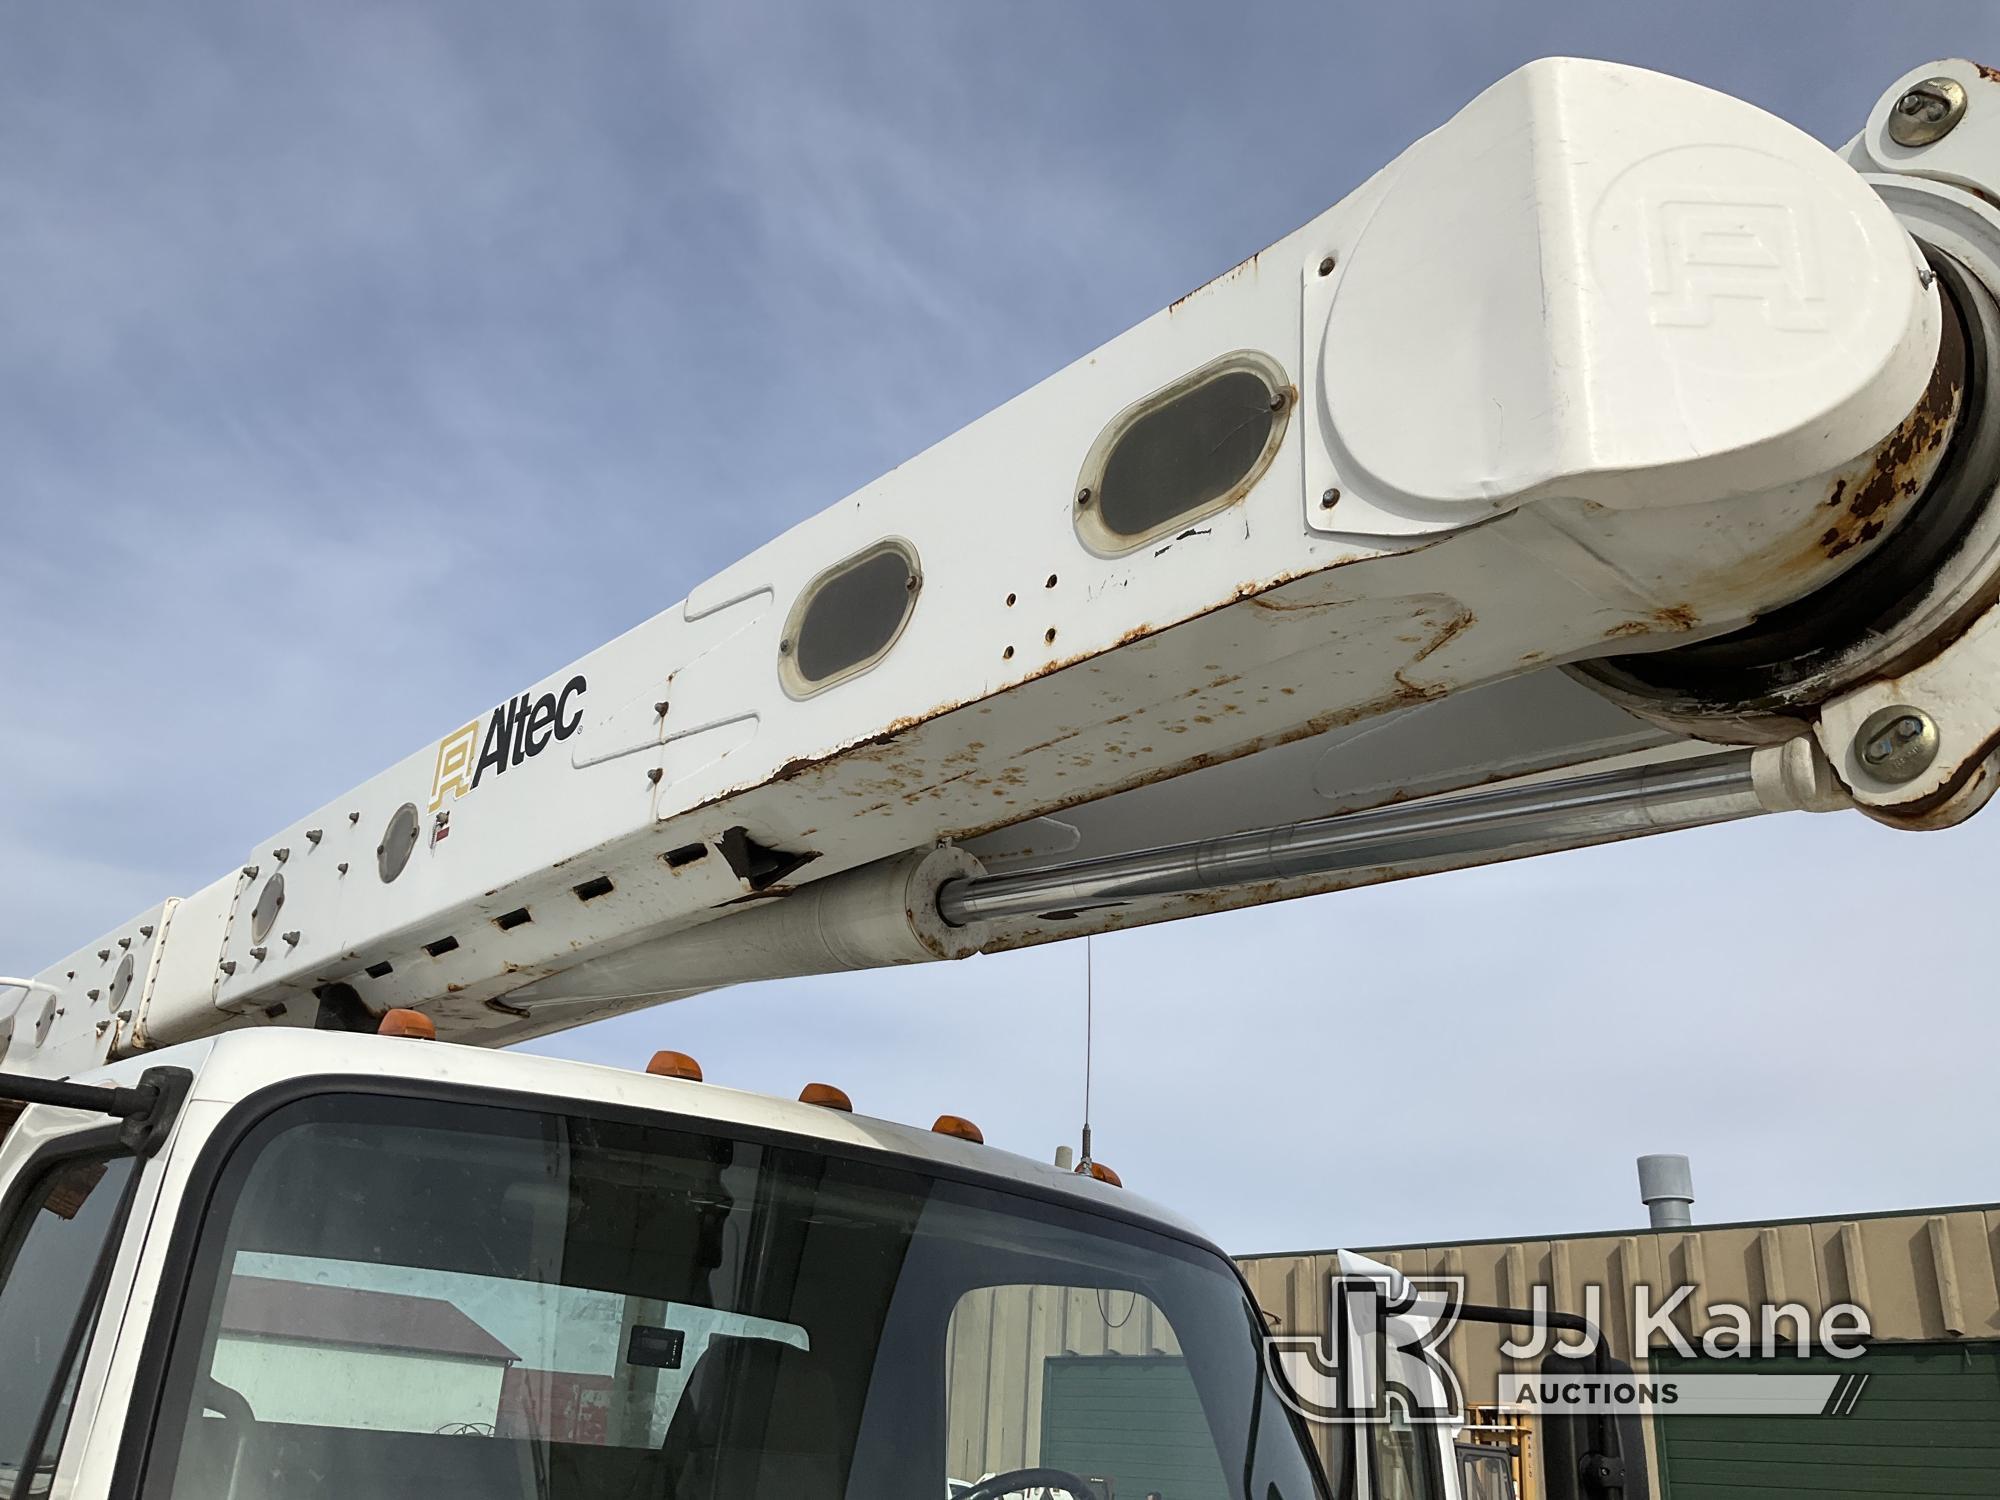 (Bloomington, IL) Altec AM55E, Over-Center Material Handling Bucket rear mounted on 2014 Freightline